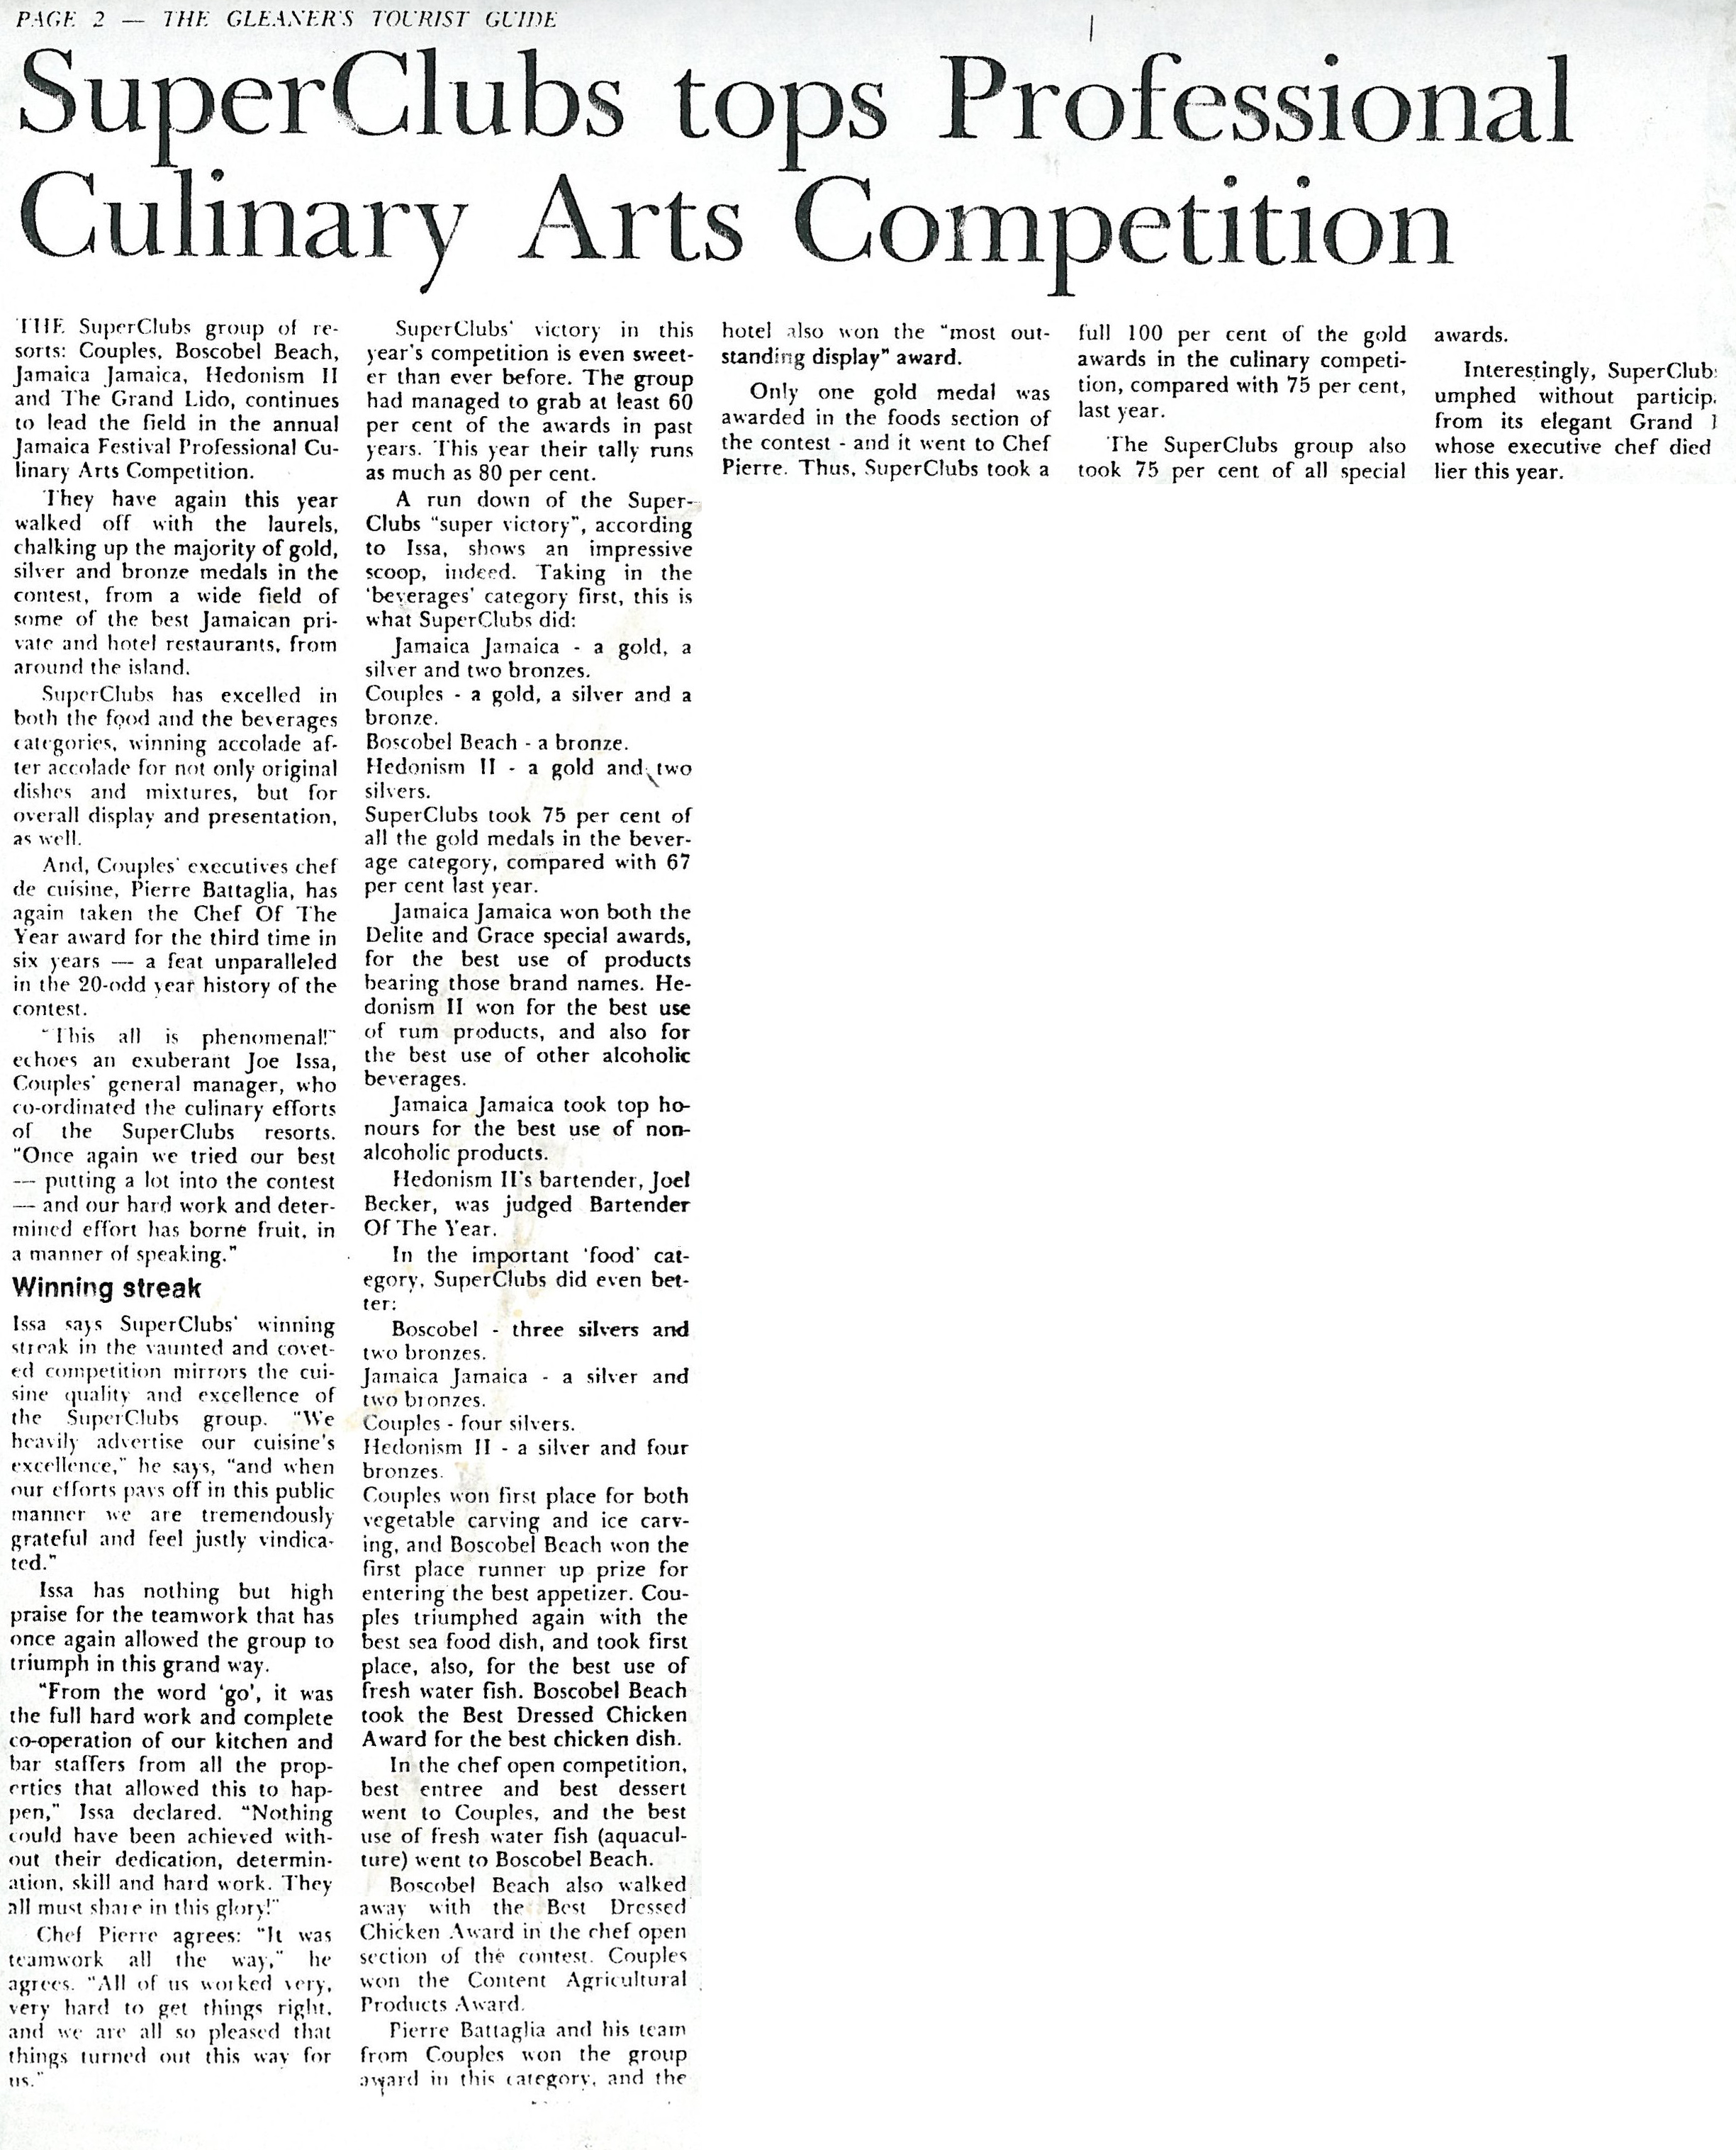 SuperClubs tops professional Culinary Arts Competition